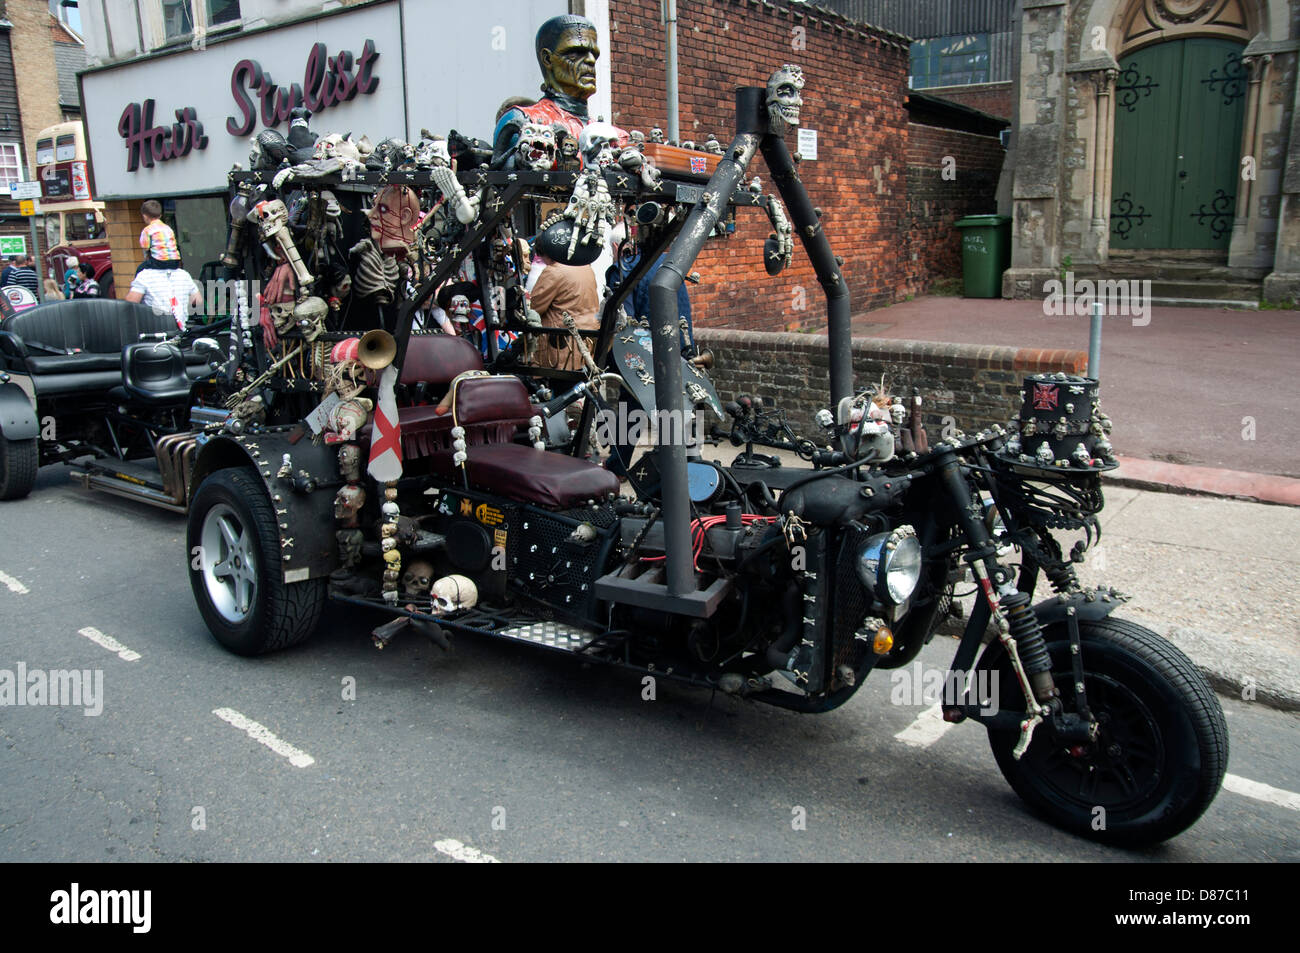 Transport motor show at faversham in Kent classic cars and buses on show over the weekend Trike with skulls home made motorcycle Stock Photo